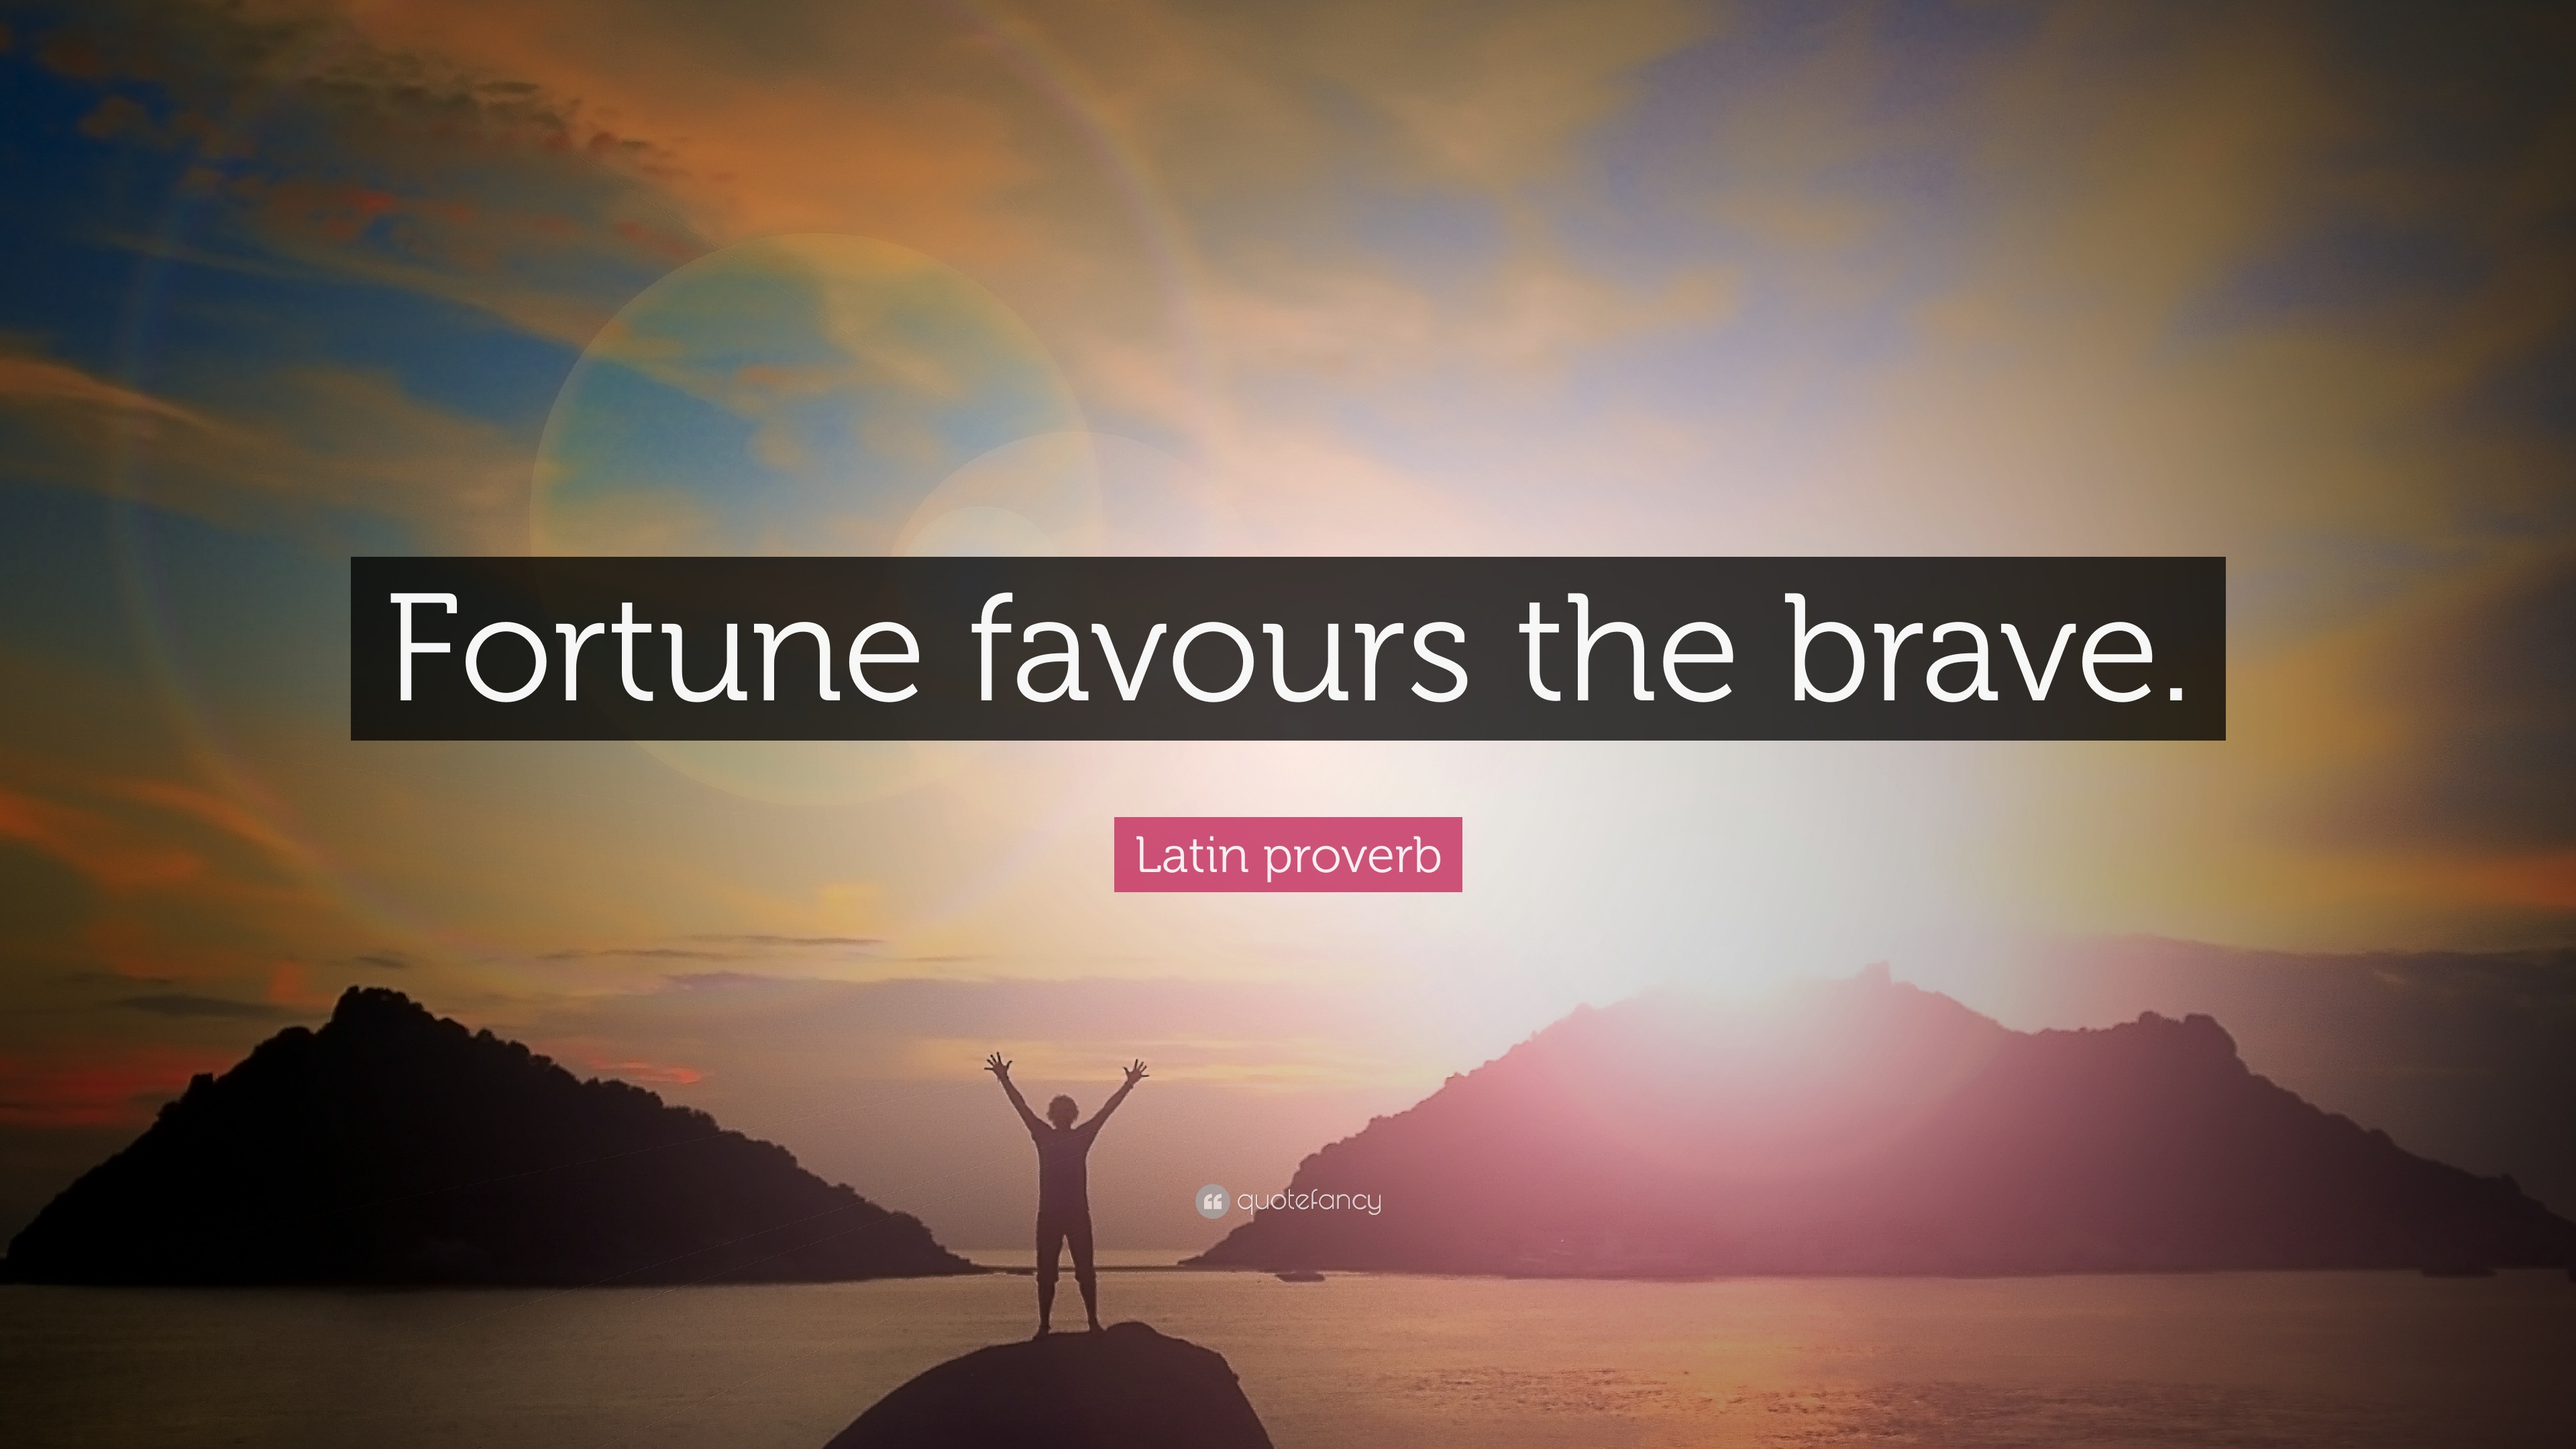 fortune favors the brave quote